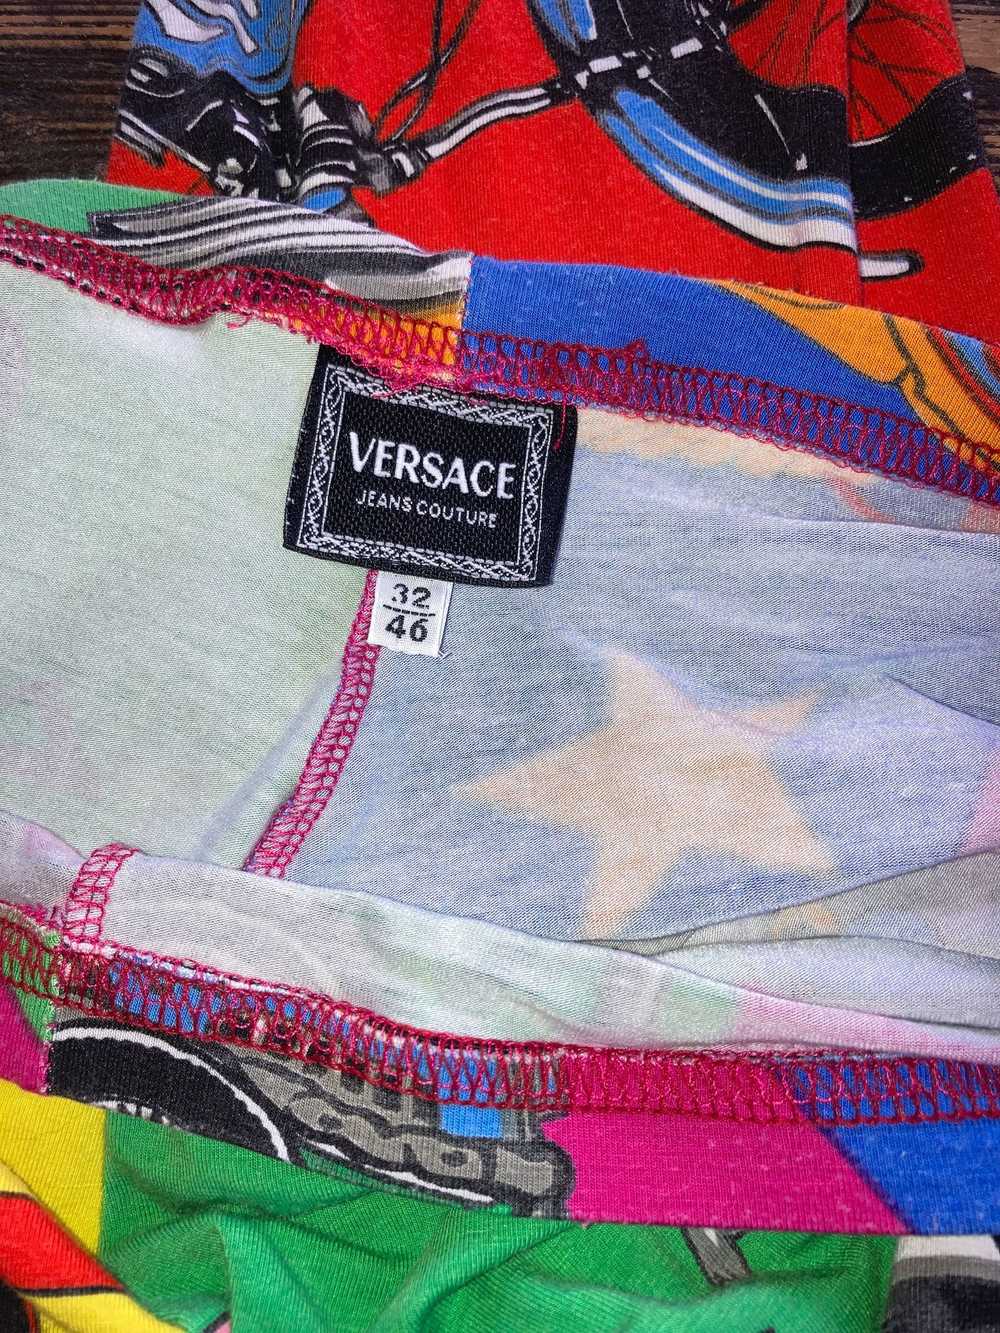 Versace Jeans Couture Colorful Versace leggings - image 12